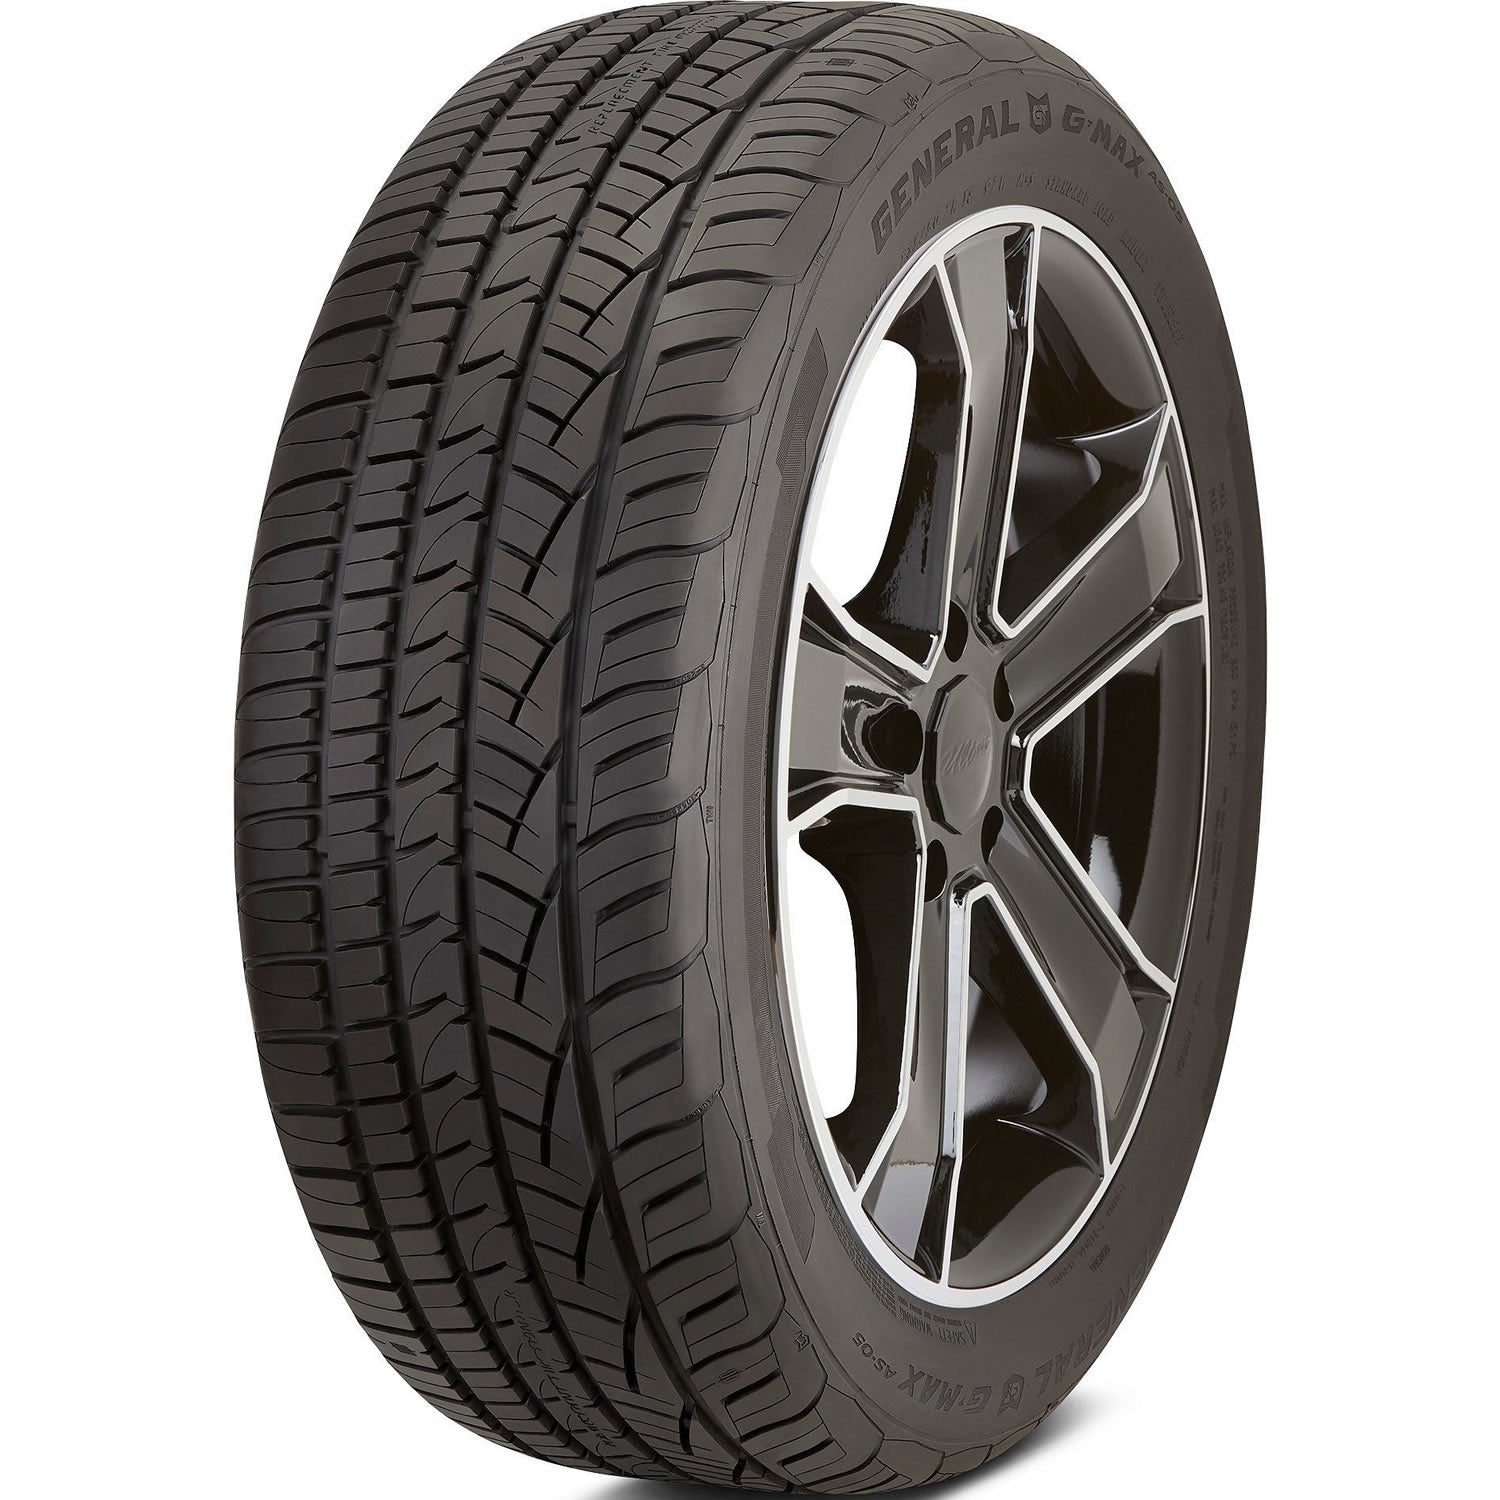 GENERAL G-MAX AS-05 215/45ZR17 (24.6X8.5R 17) Tires